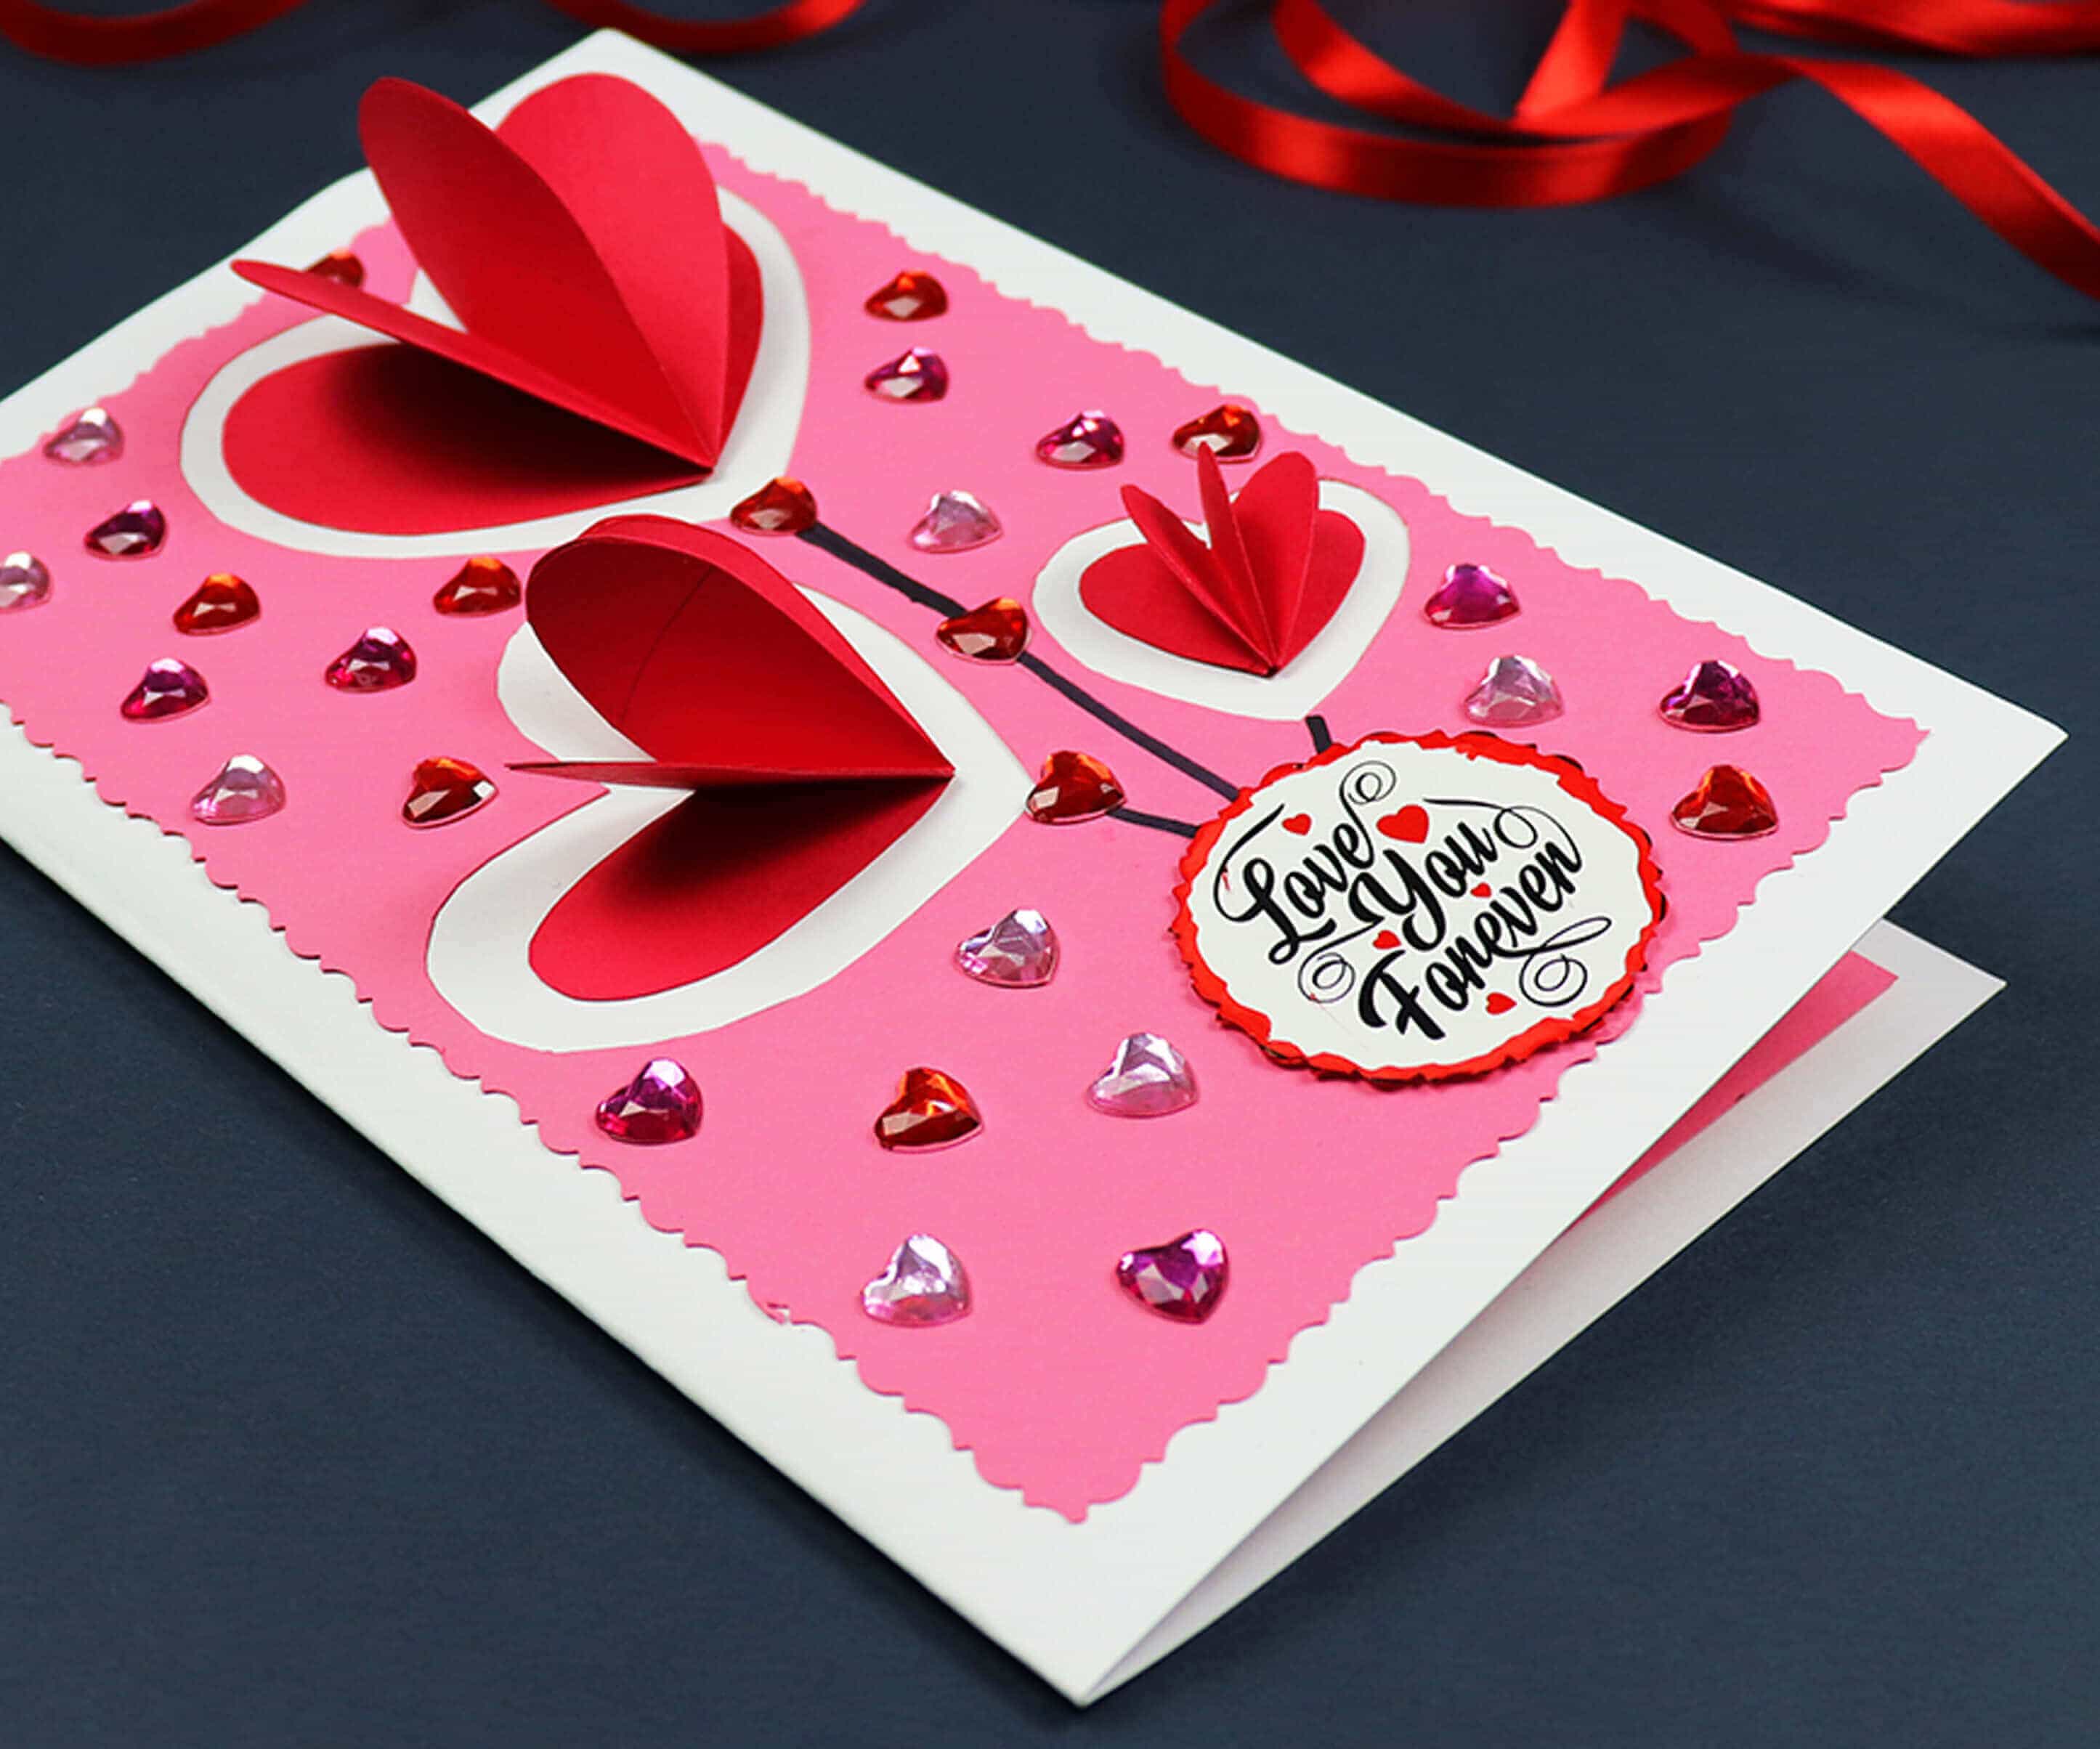 Greeting Card Design for Valentine's Day